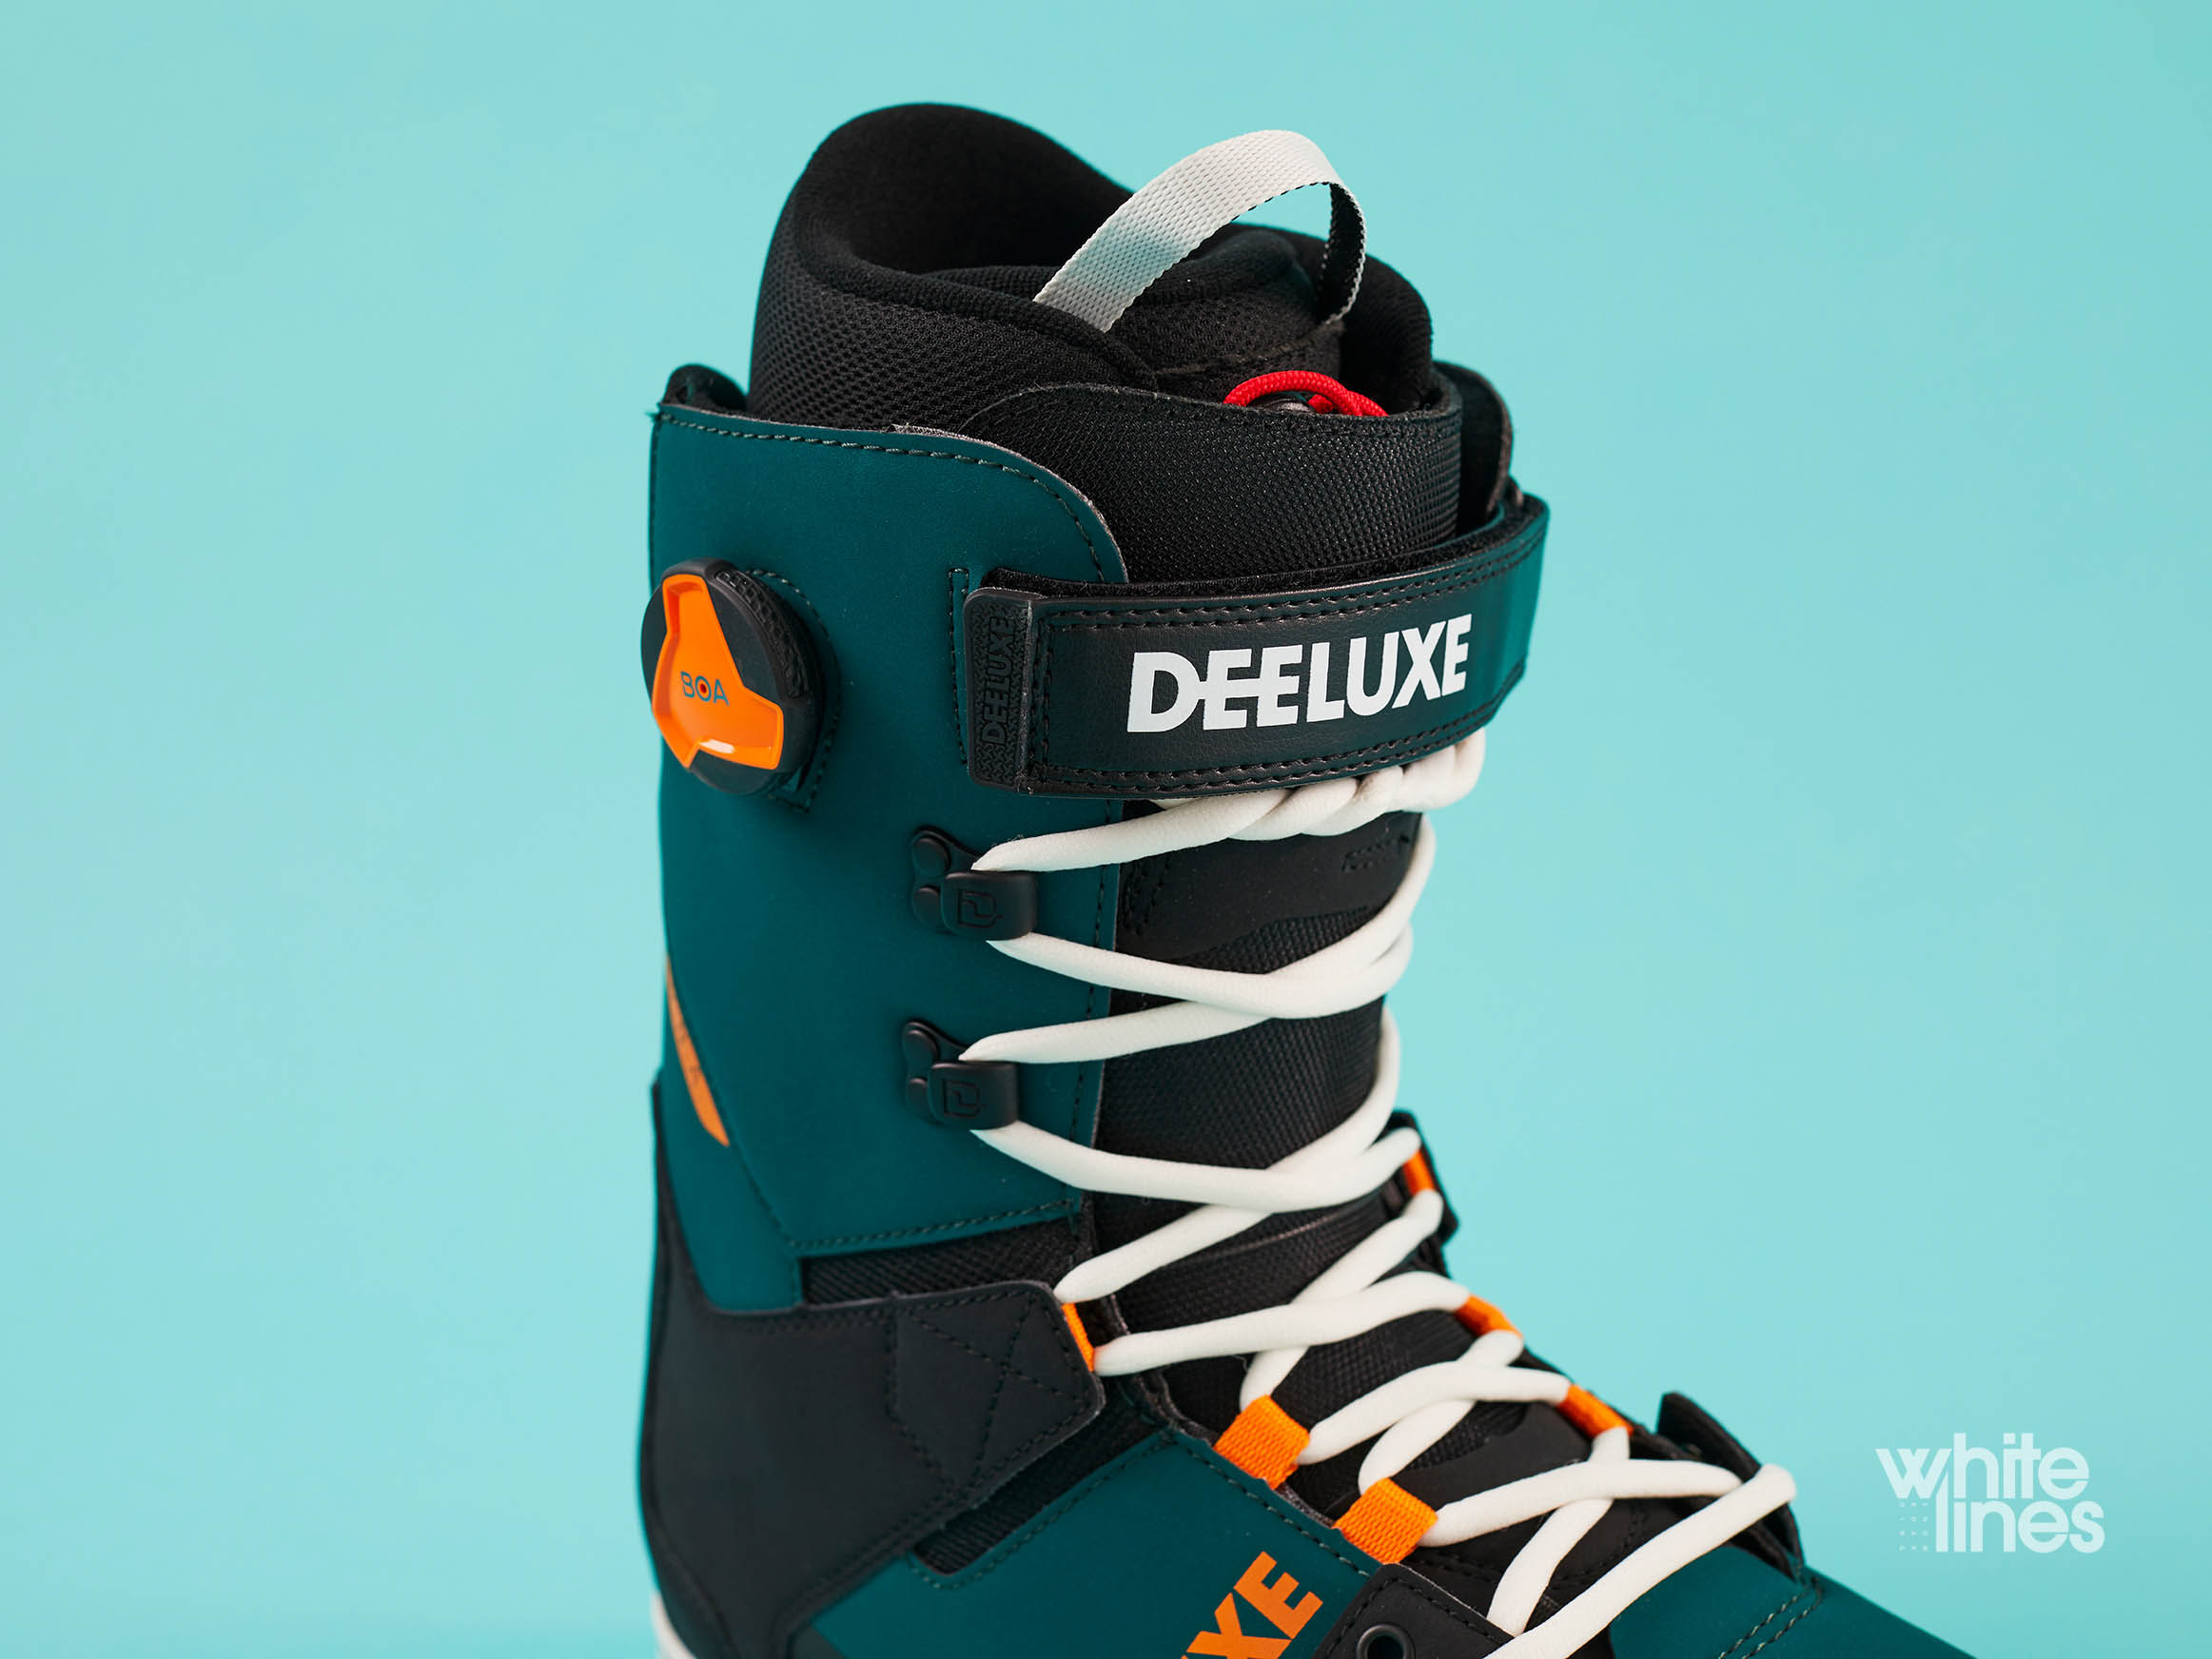 Deeluxe DNA 2021-2022 Snowboard Boots Review - White